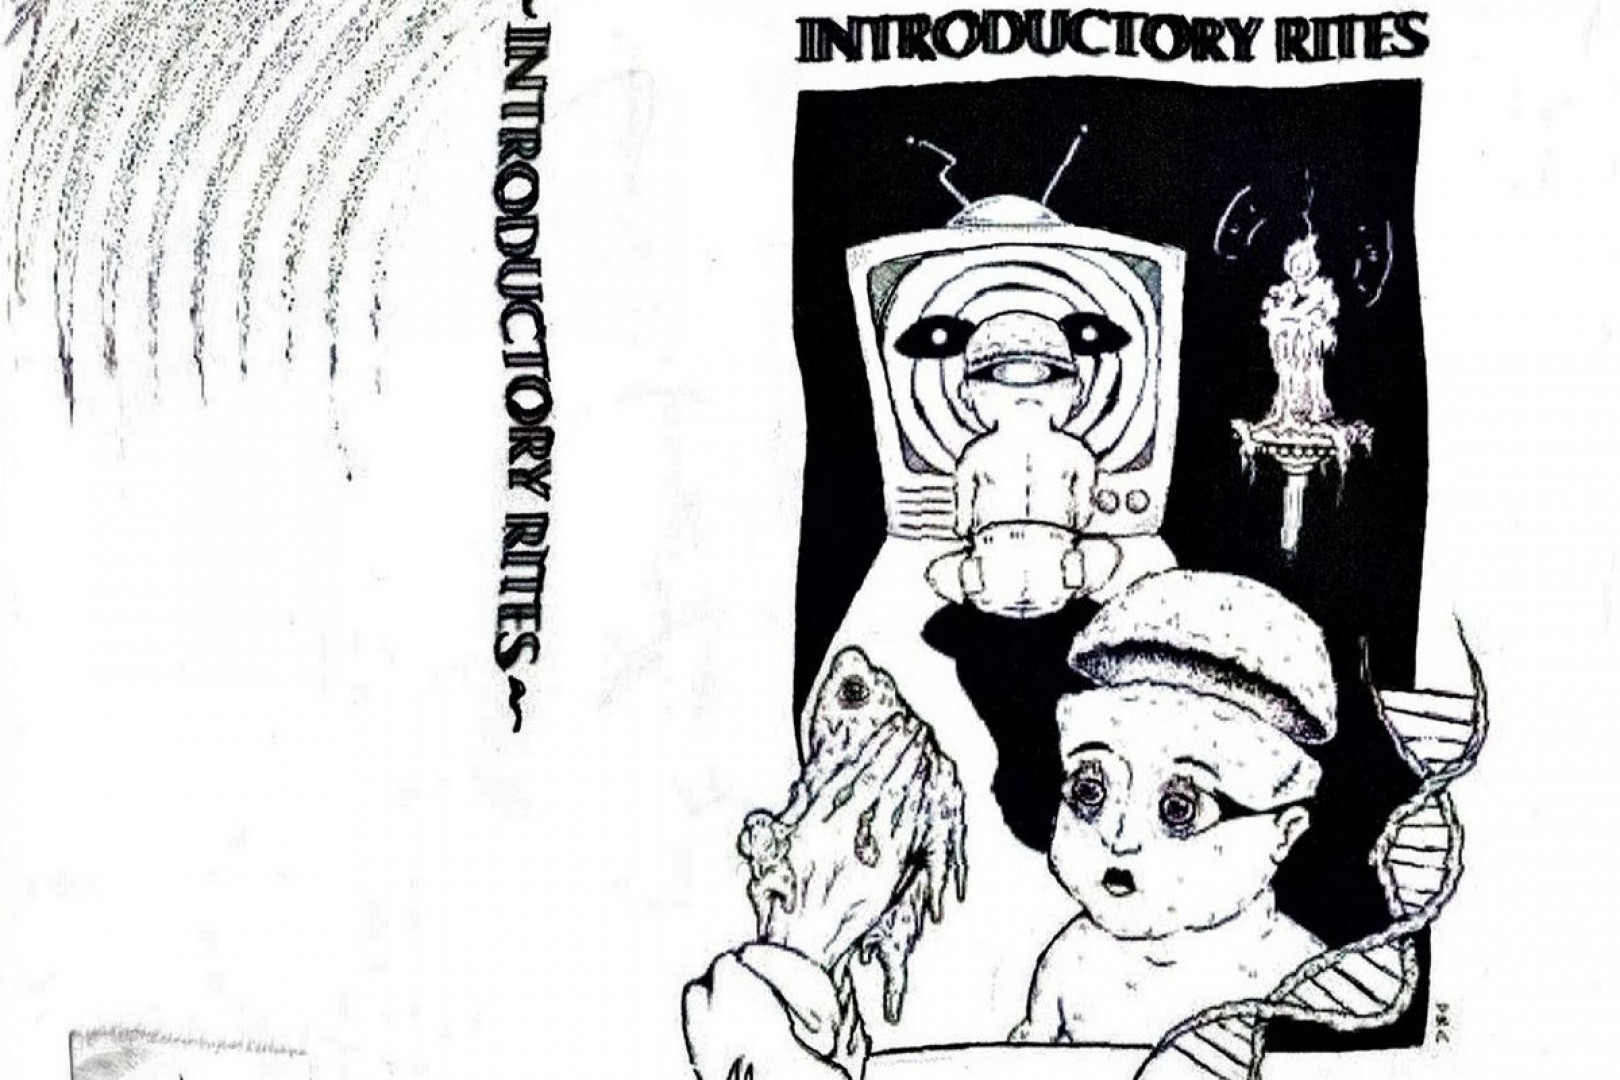 Abi Ooze, Foil, Easy Targets, more on 'Introductory Rites' comp